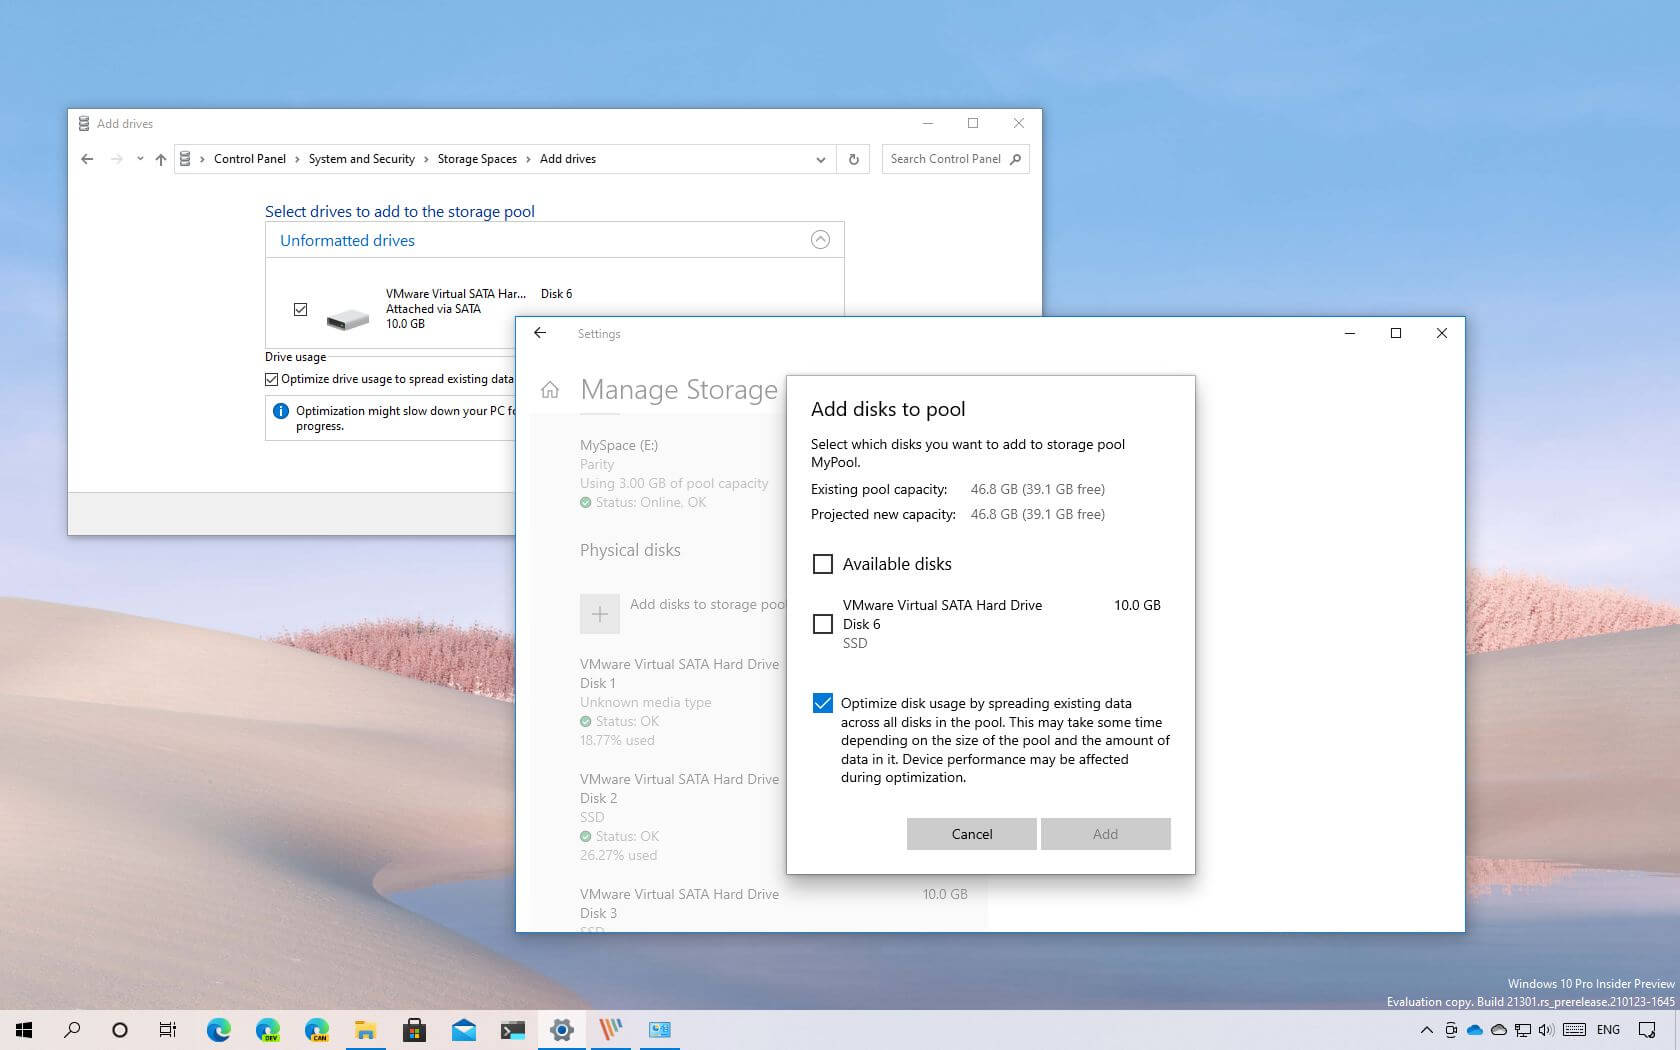 How to add drives to pool in Storage on Windows 10 - Pureinfotech